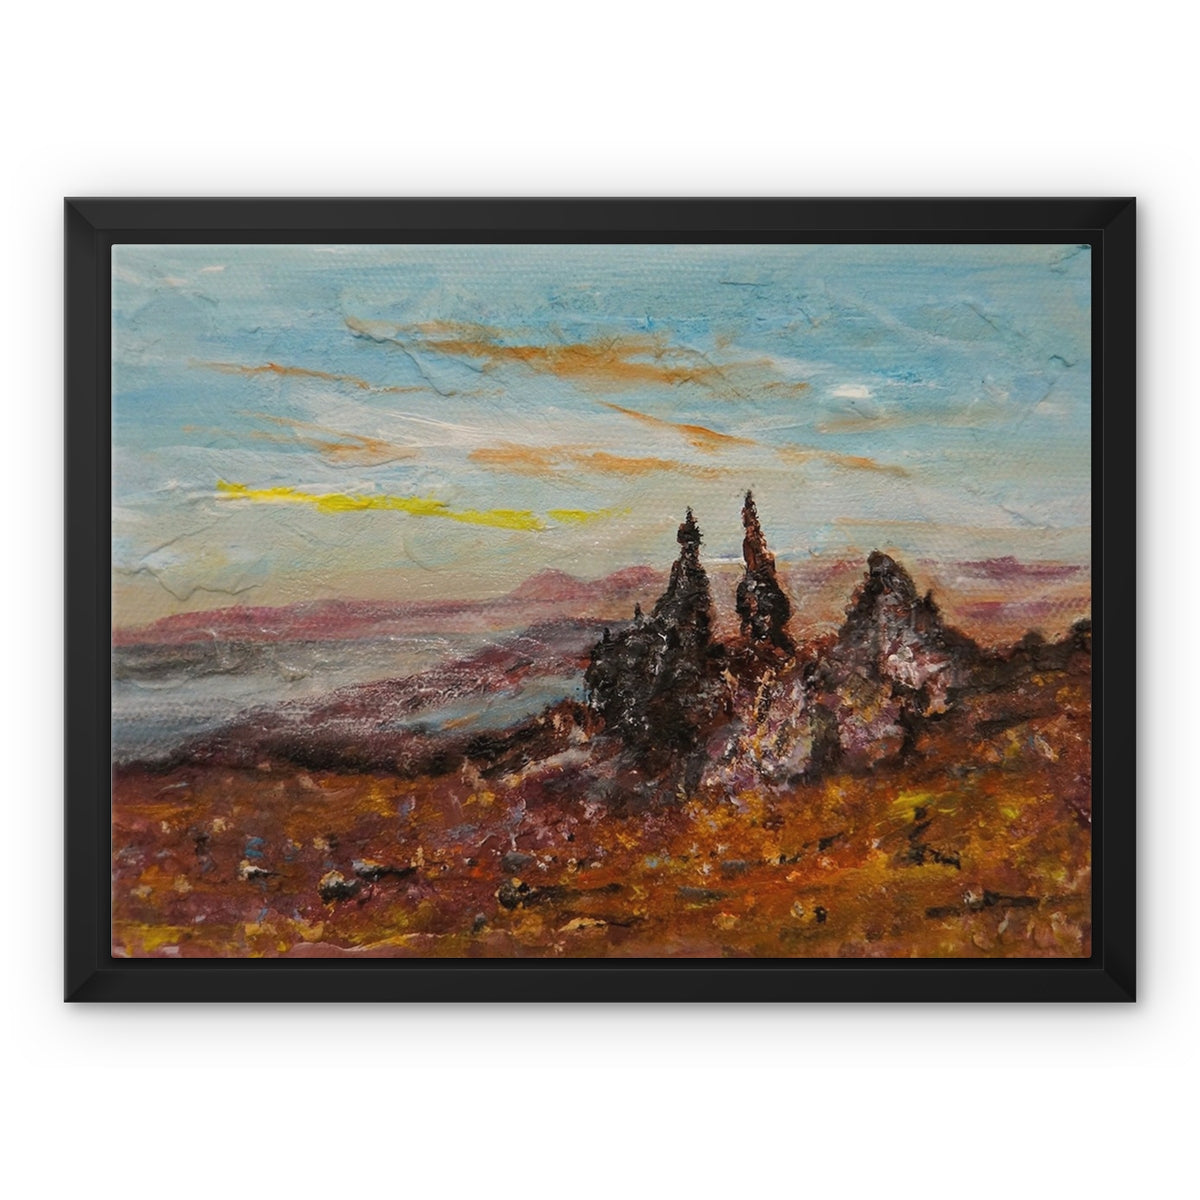 The Storr Skye Painting | Framed Canvas From Scotland-Floating Framed Canvas Prints-Skye Art Gallery-16"x12"-Black Frame-Paintings, Prints, Homeware, Art Gifts From Scotland By Scottish Artist Kevin Hunter